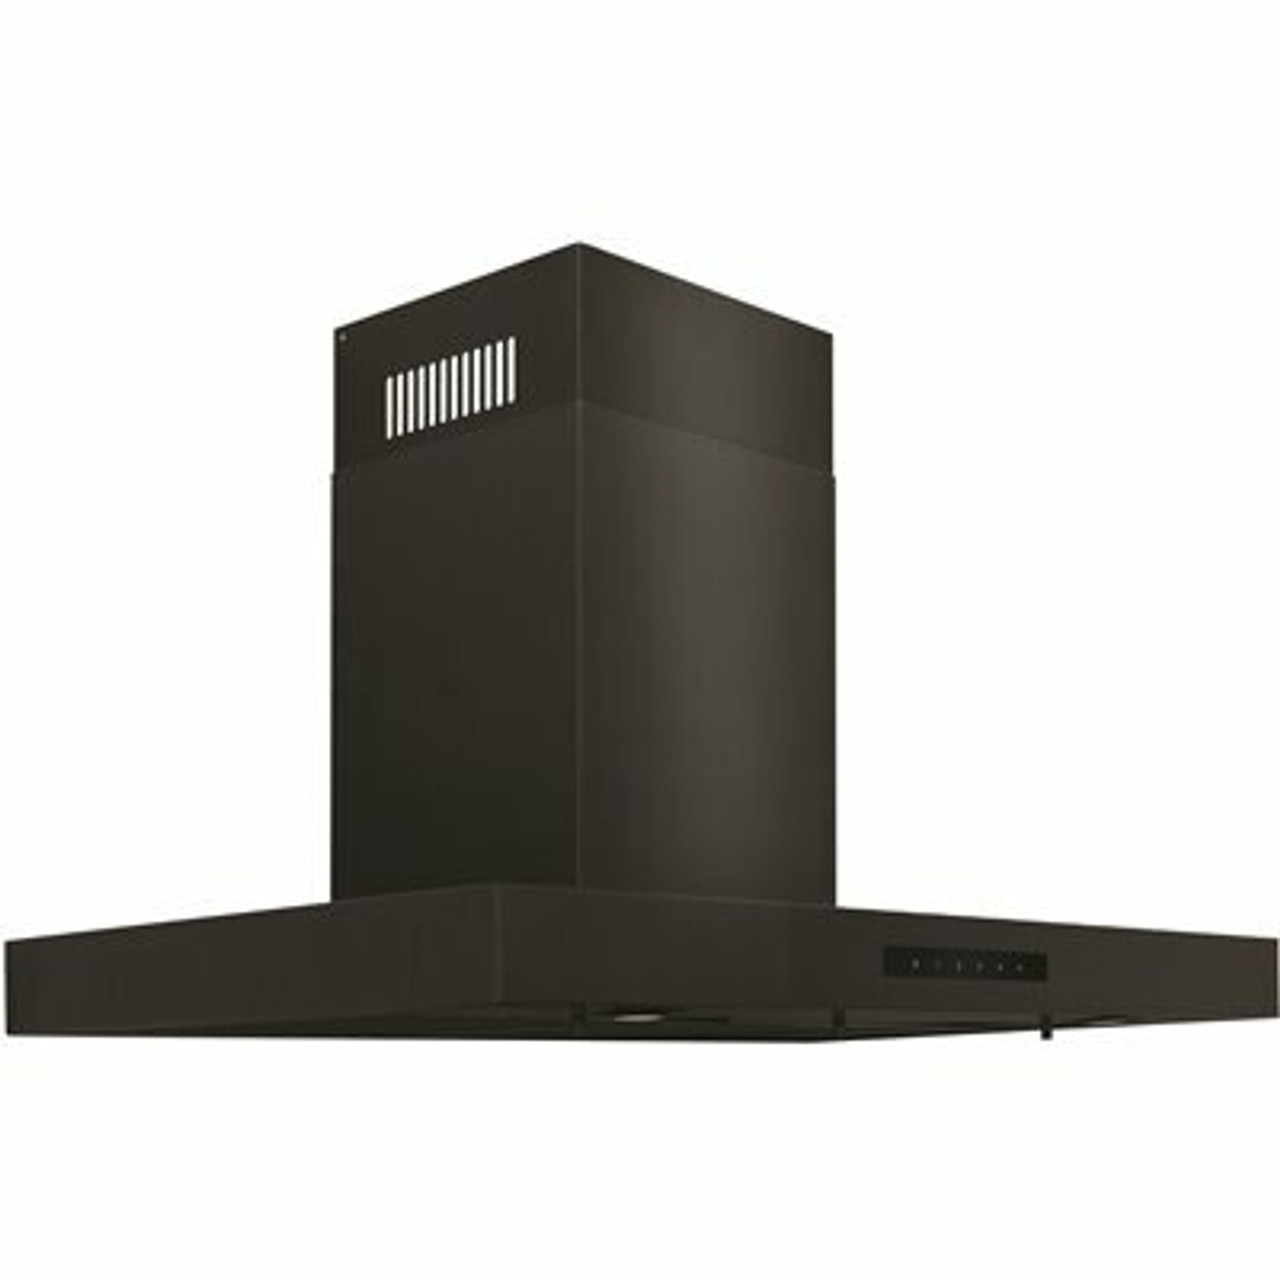 36 In. Convertible Vent Wall Mount Range Hood In Black Stainless Steel With Crown Molding (Bskencrn-36)